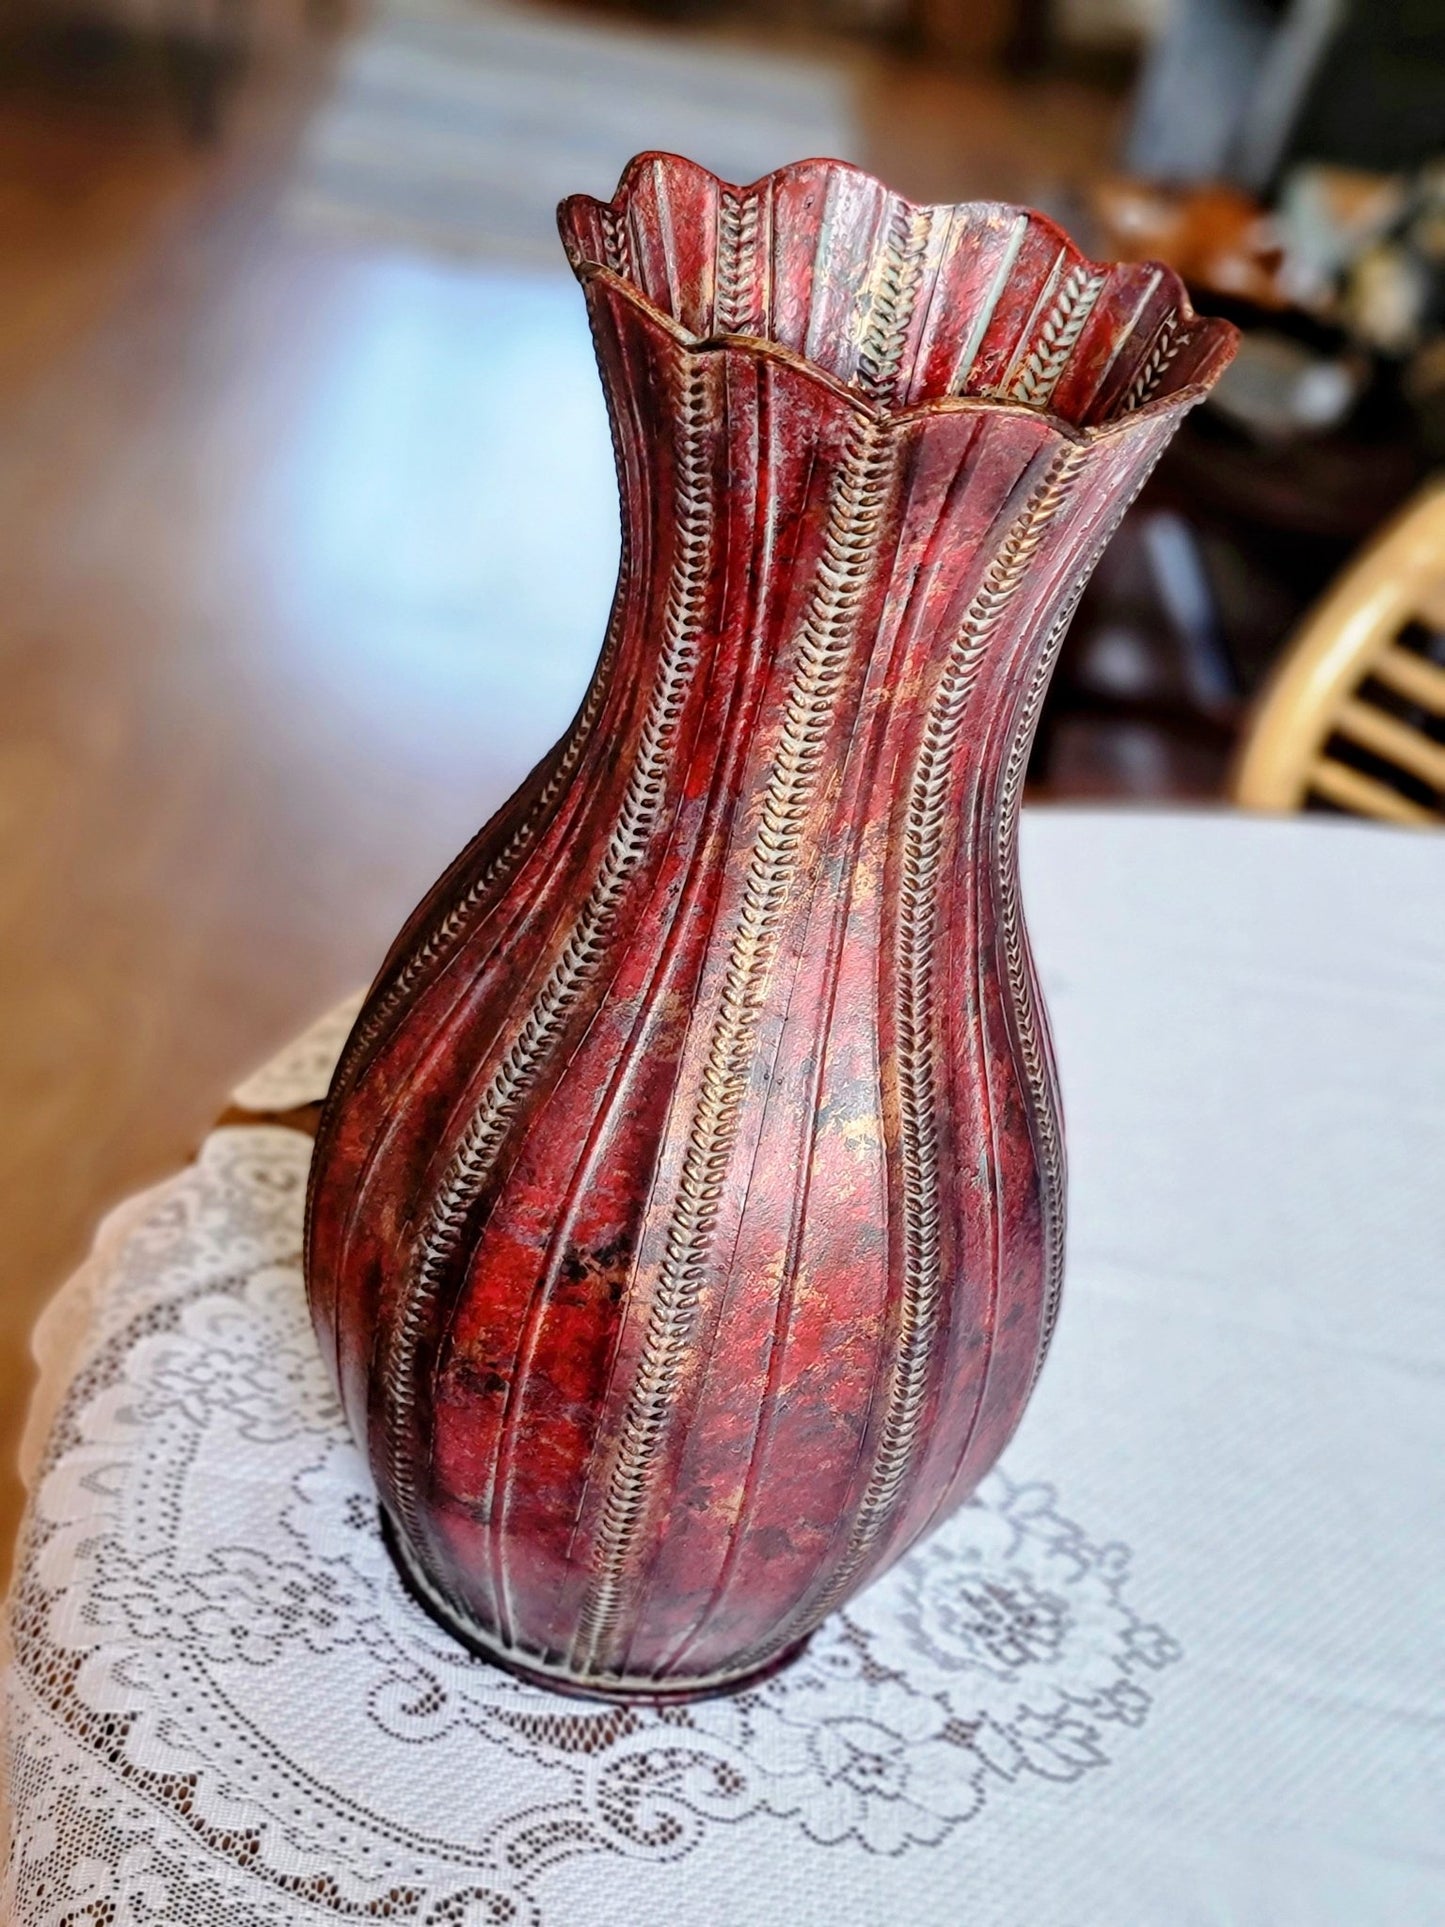 Red and Gold Zipper Vase - Smash's Stashes